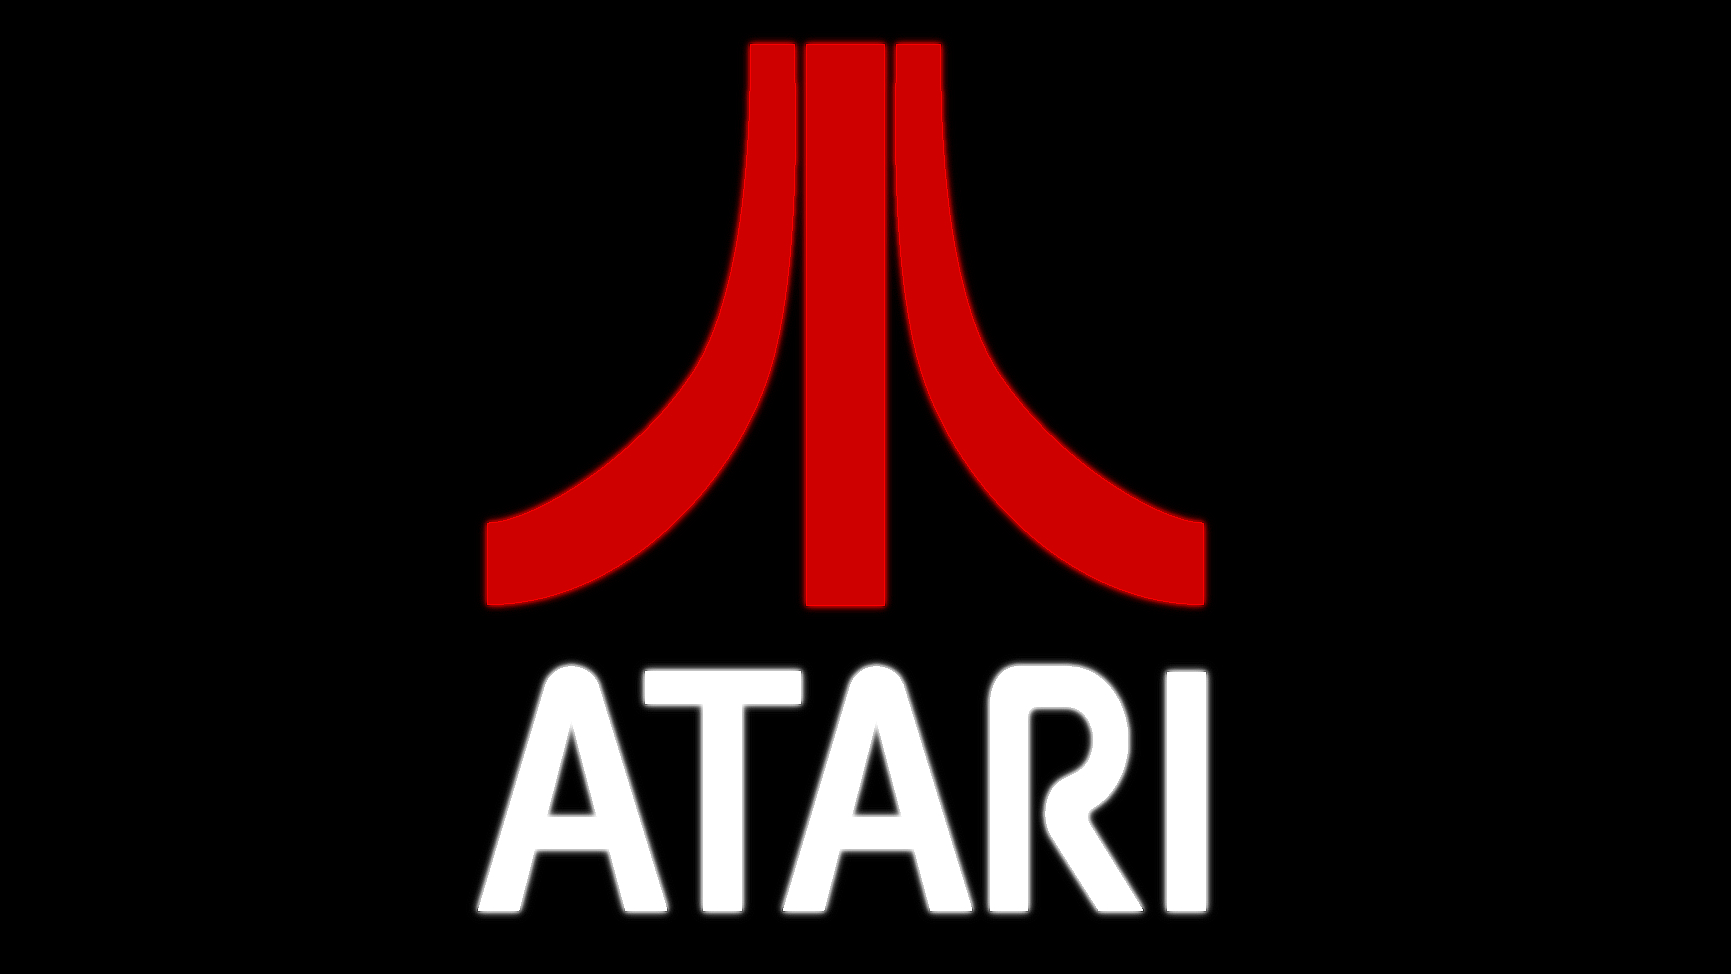 https://nftgames.net/wp-content/uploads/2023/11/The-Atari-Club-has-announced-the-perfect-comeback-with-Members-Only-jackets.-The-game-publisher-is-releasing-Atari-Club-member-jackets.jpg